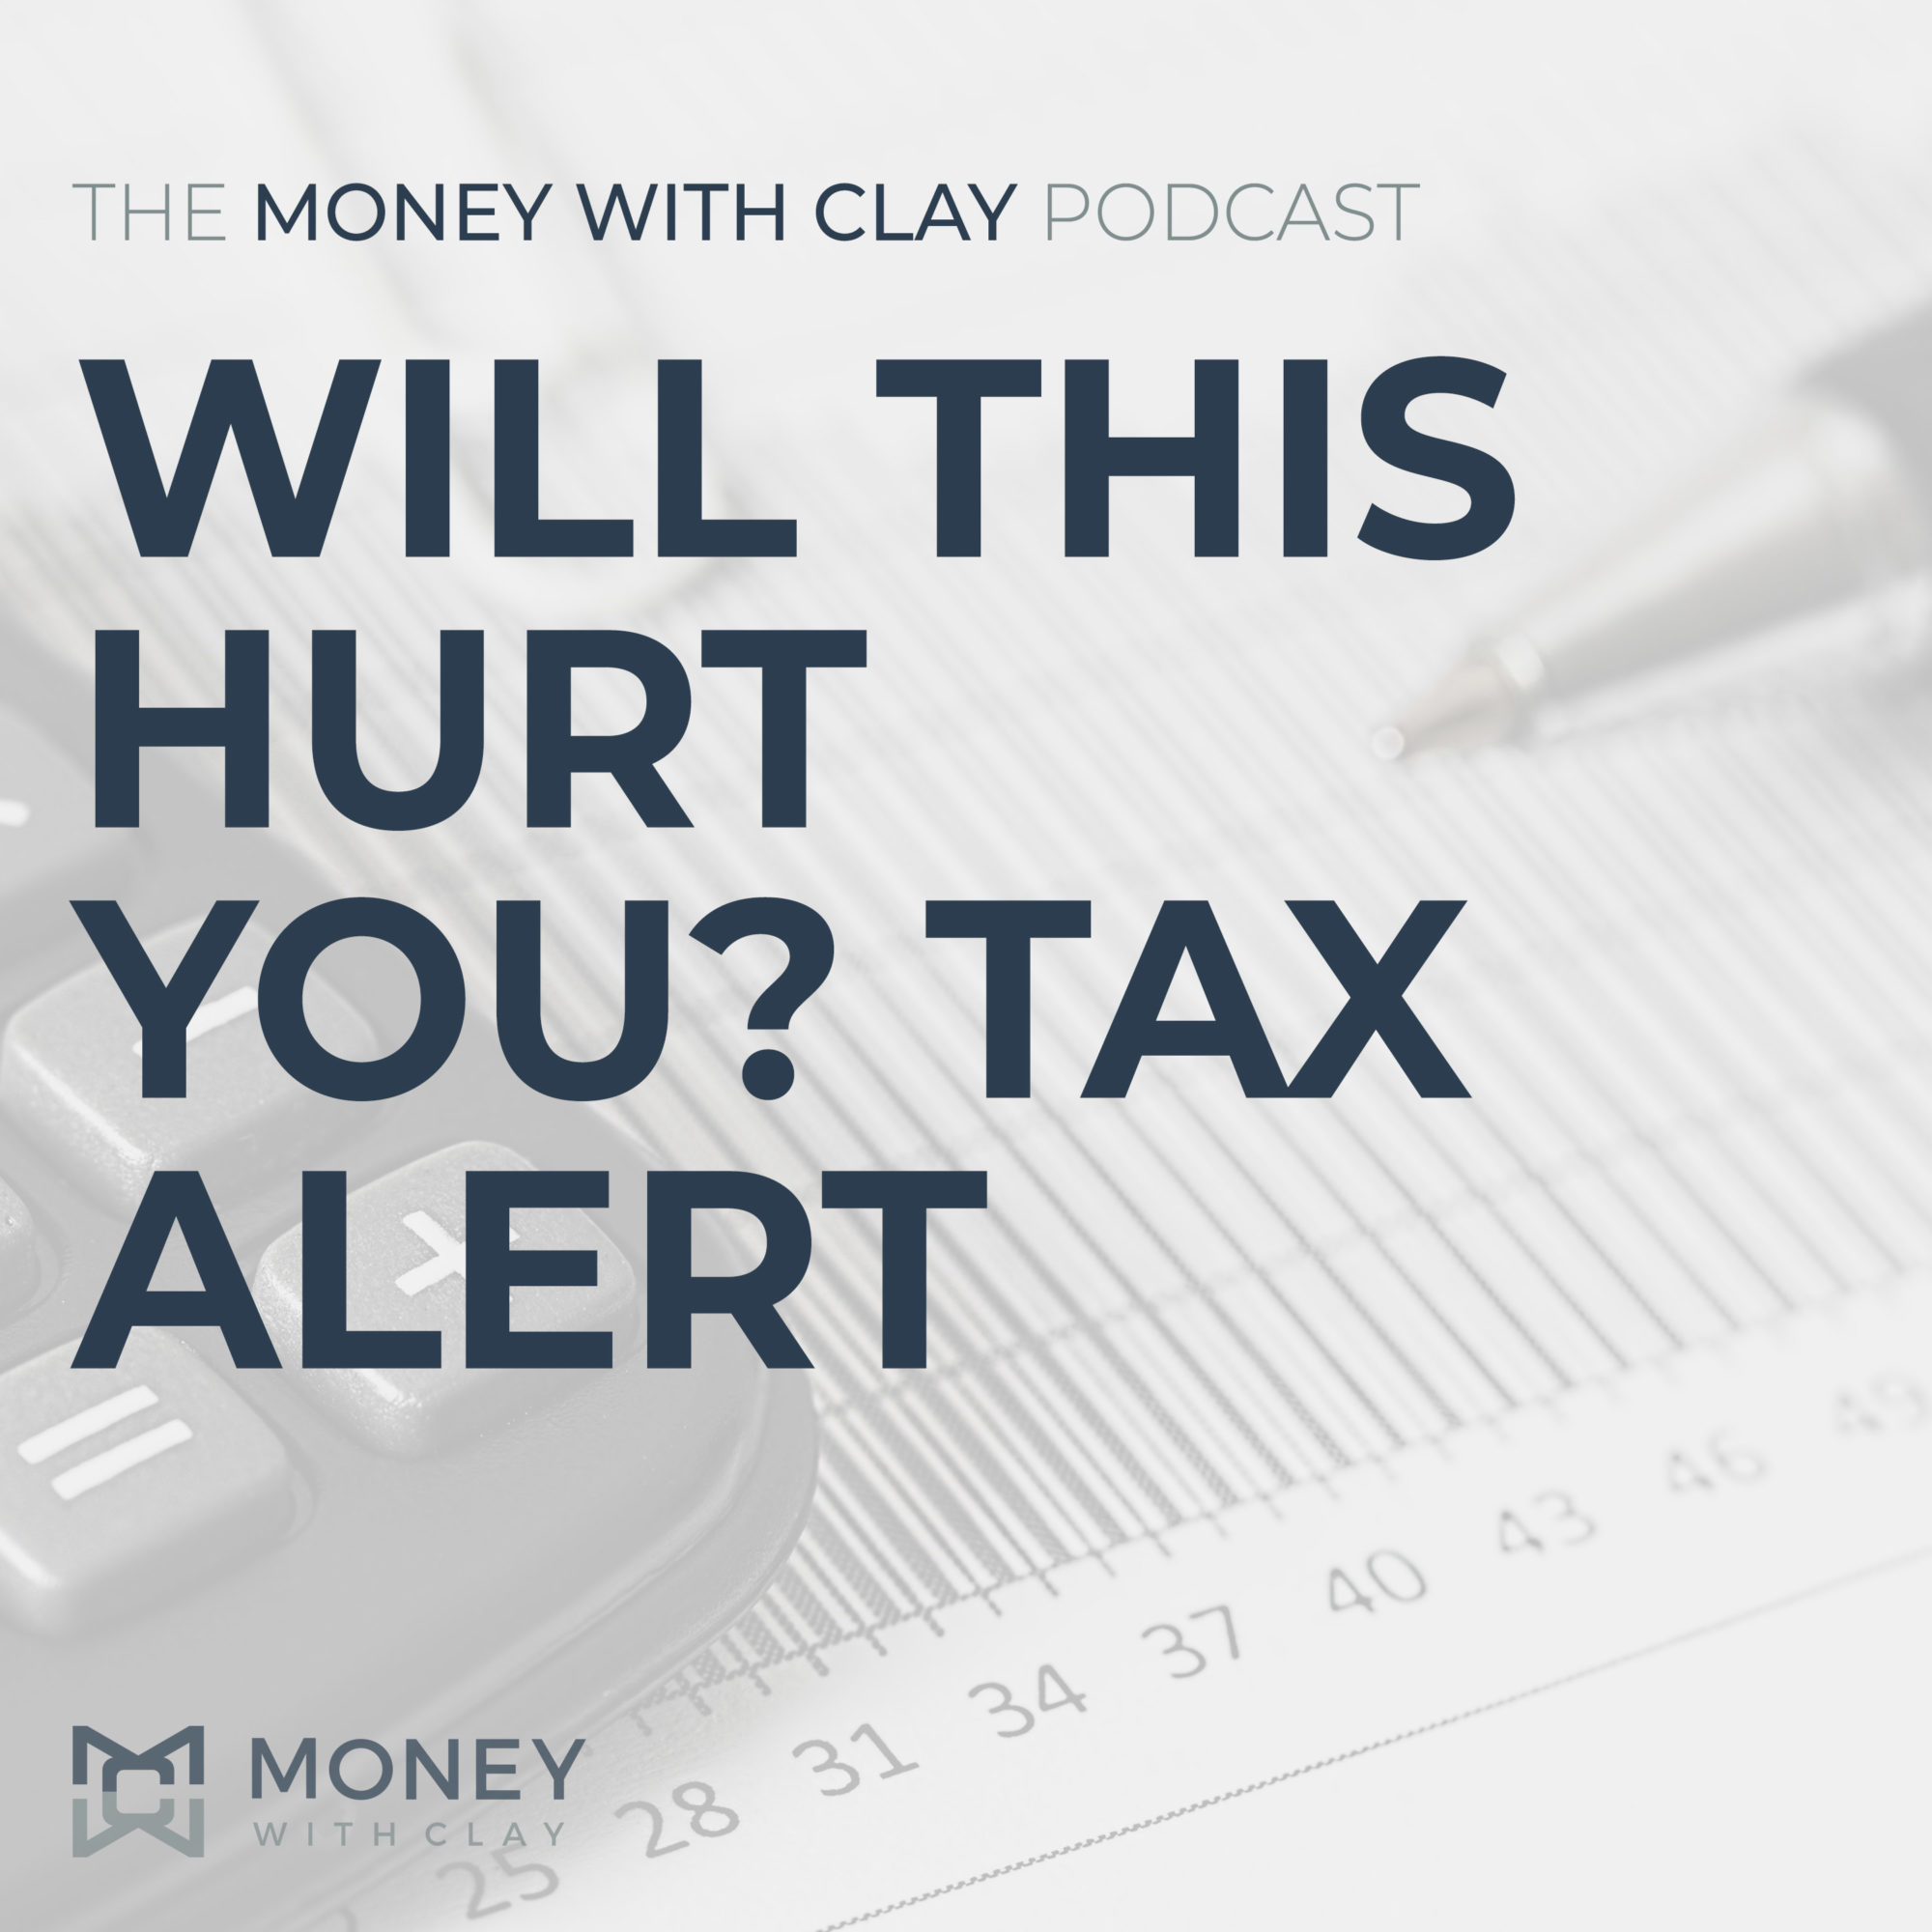 Will This Hurt You? Tax Alert... | #124